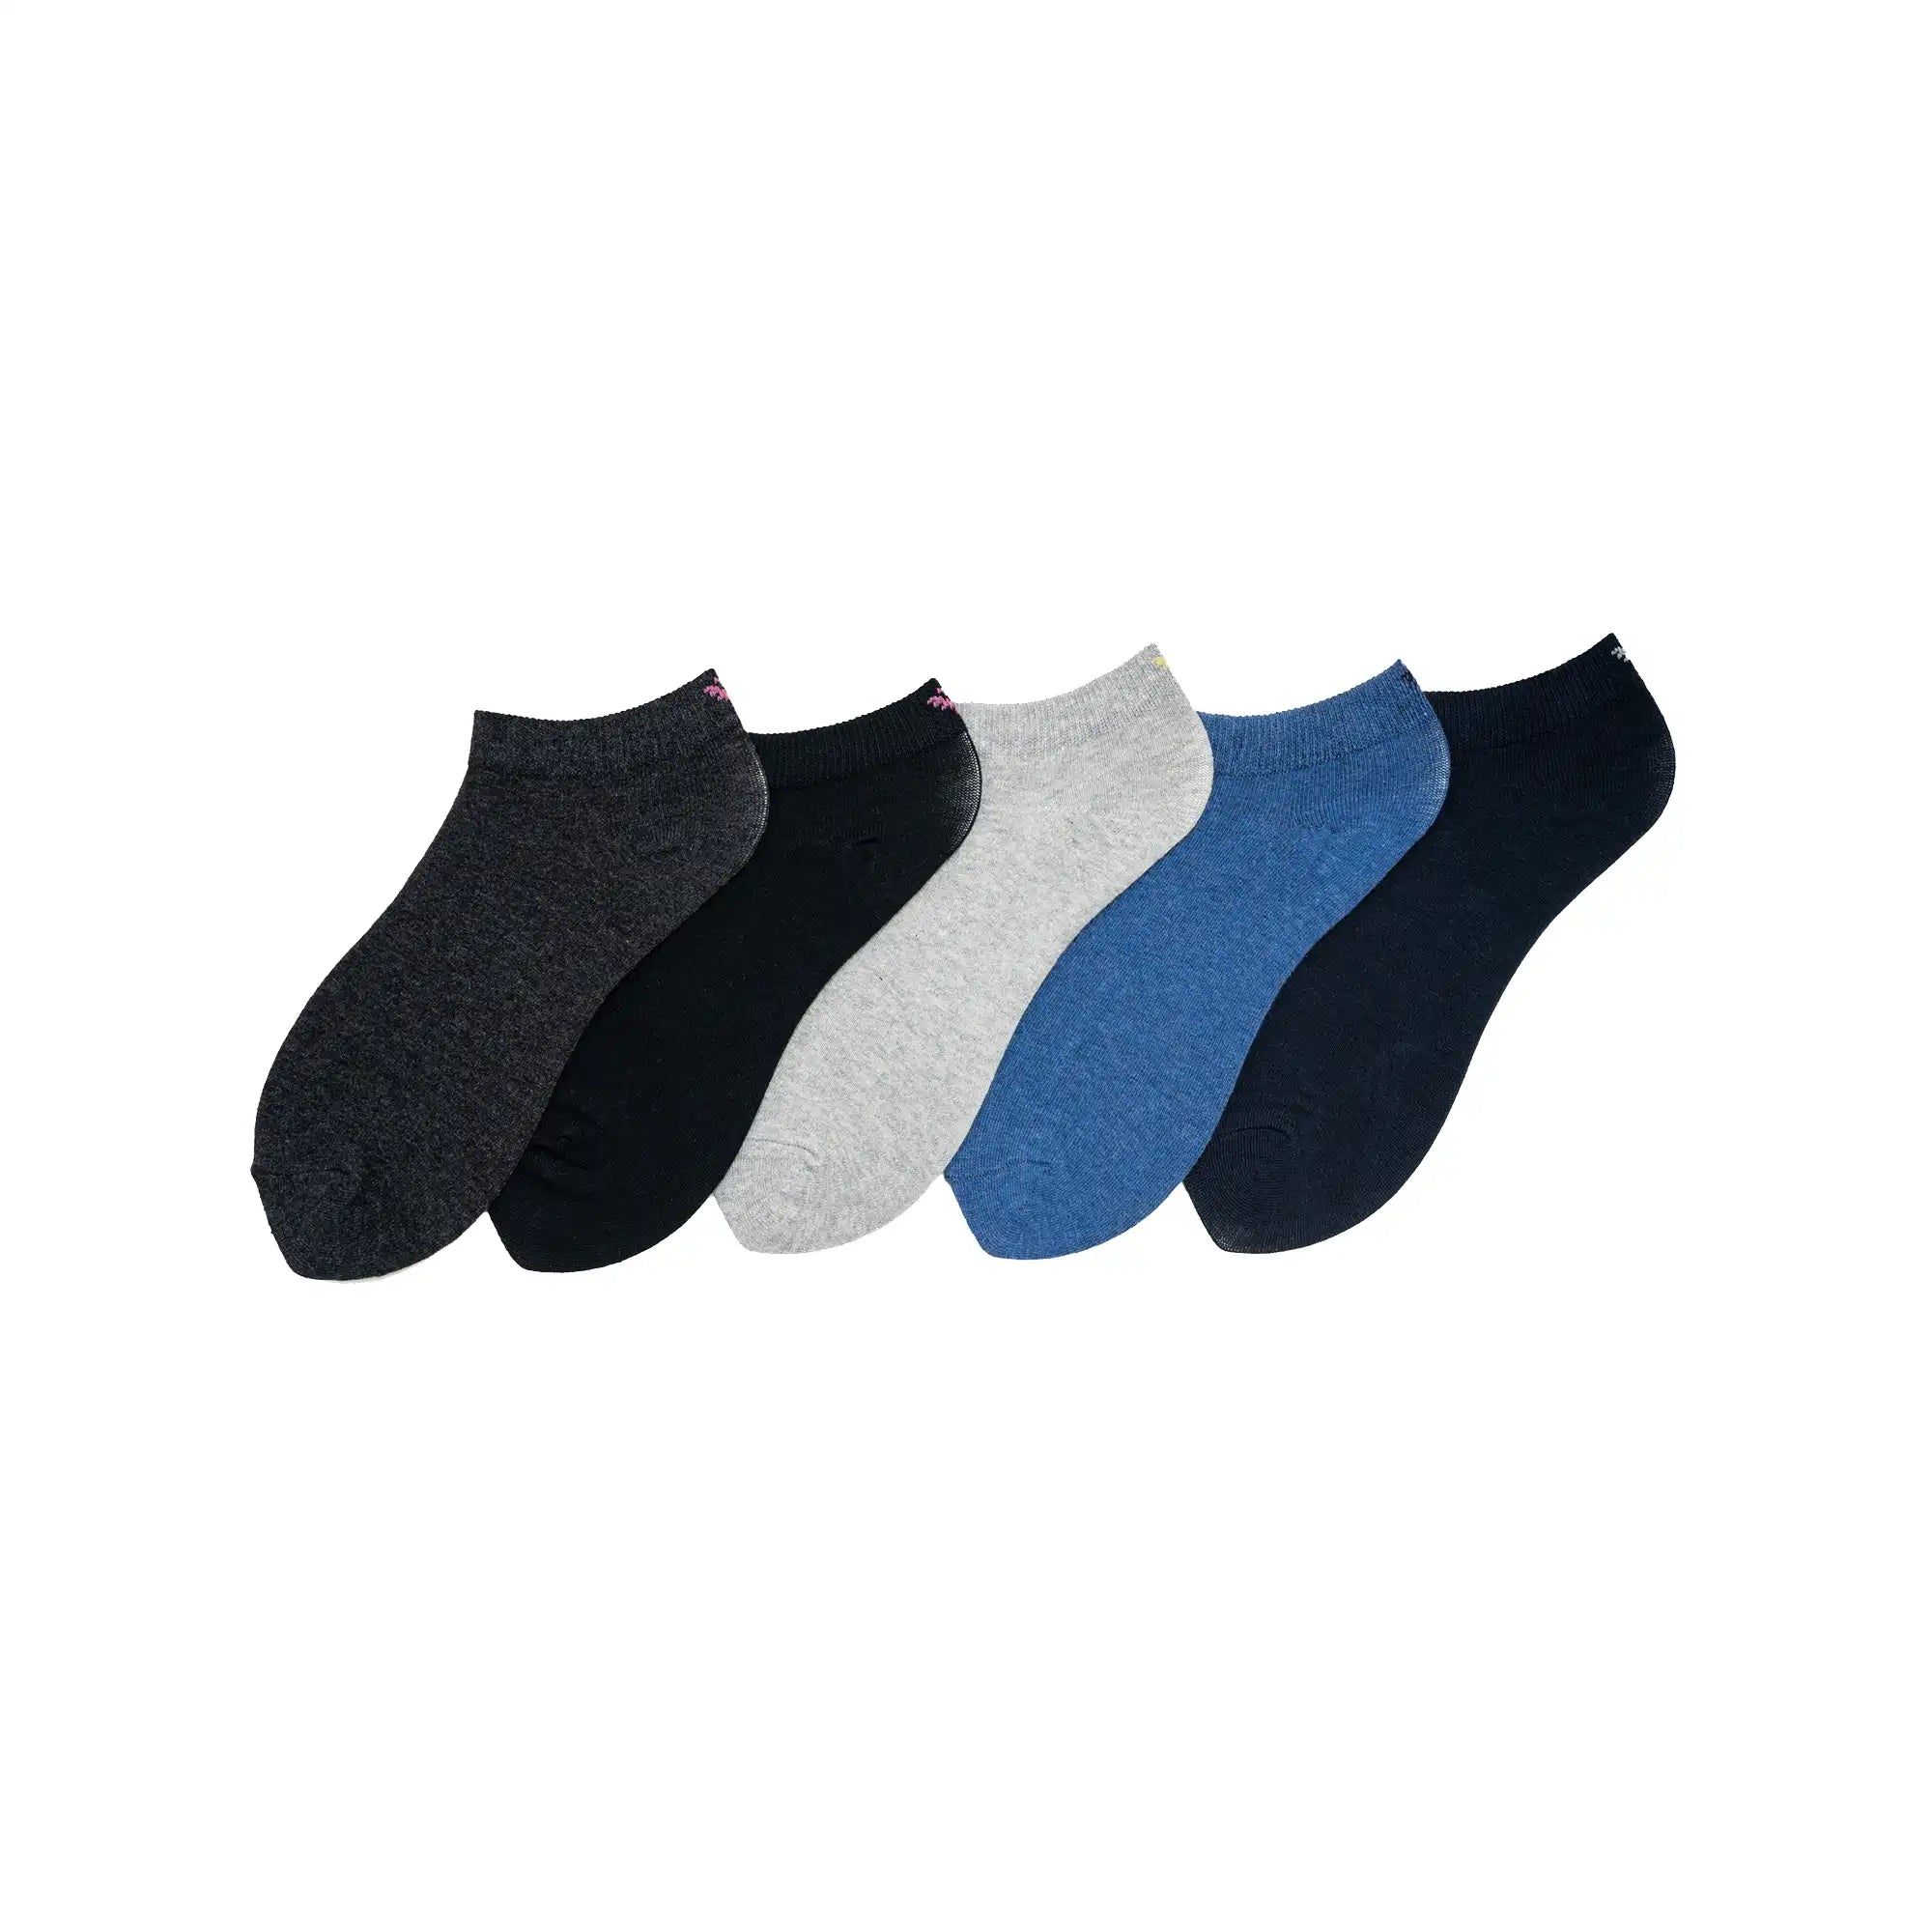 Young Wings Women's_Socks D.Multi Colour Cotton Fabric Design Free Size Low  Ankle Length Casual Wear Socks - Pack of 5, Style no. 6101-W